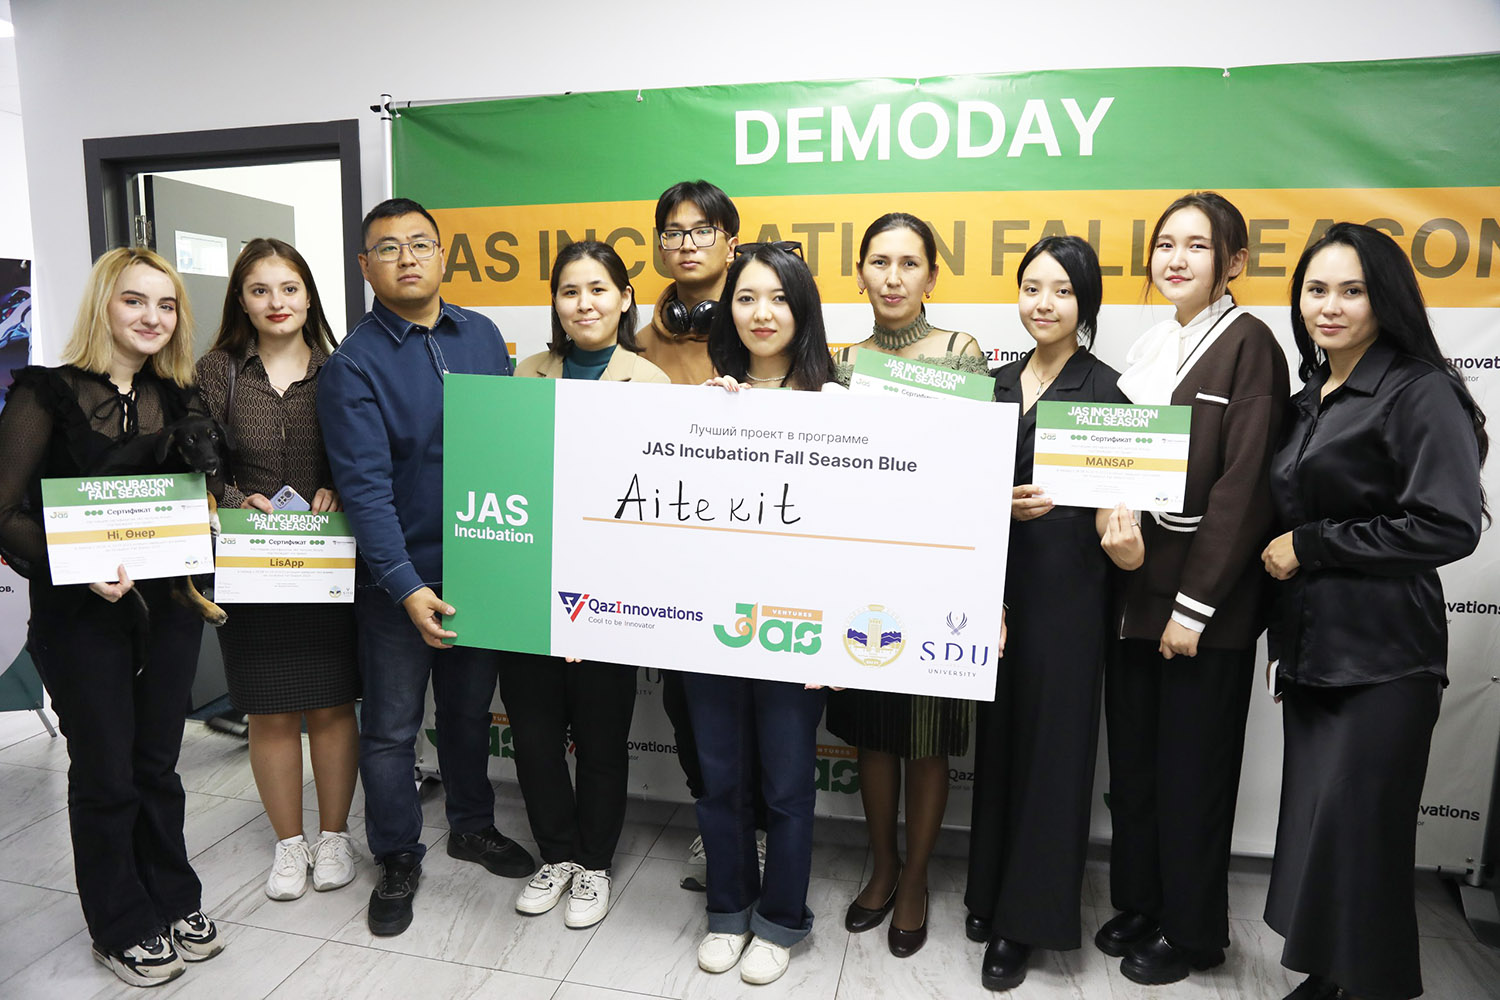 KazNU alumna wins startup projects competition